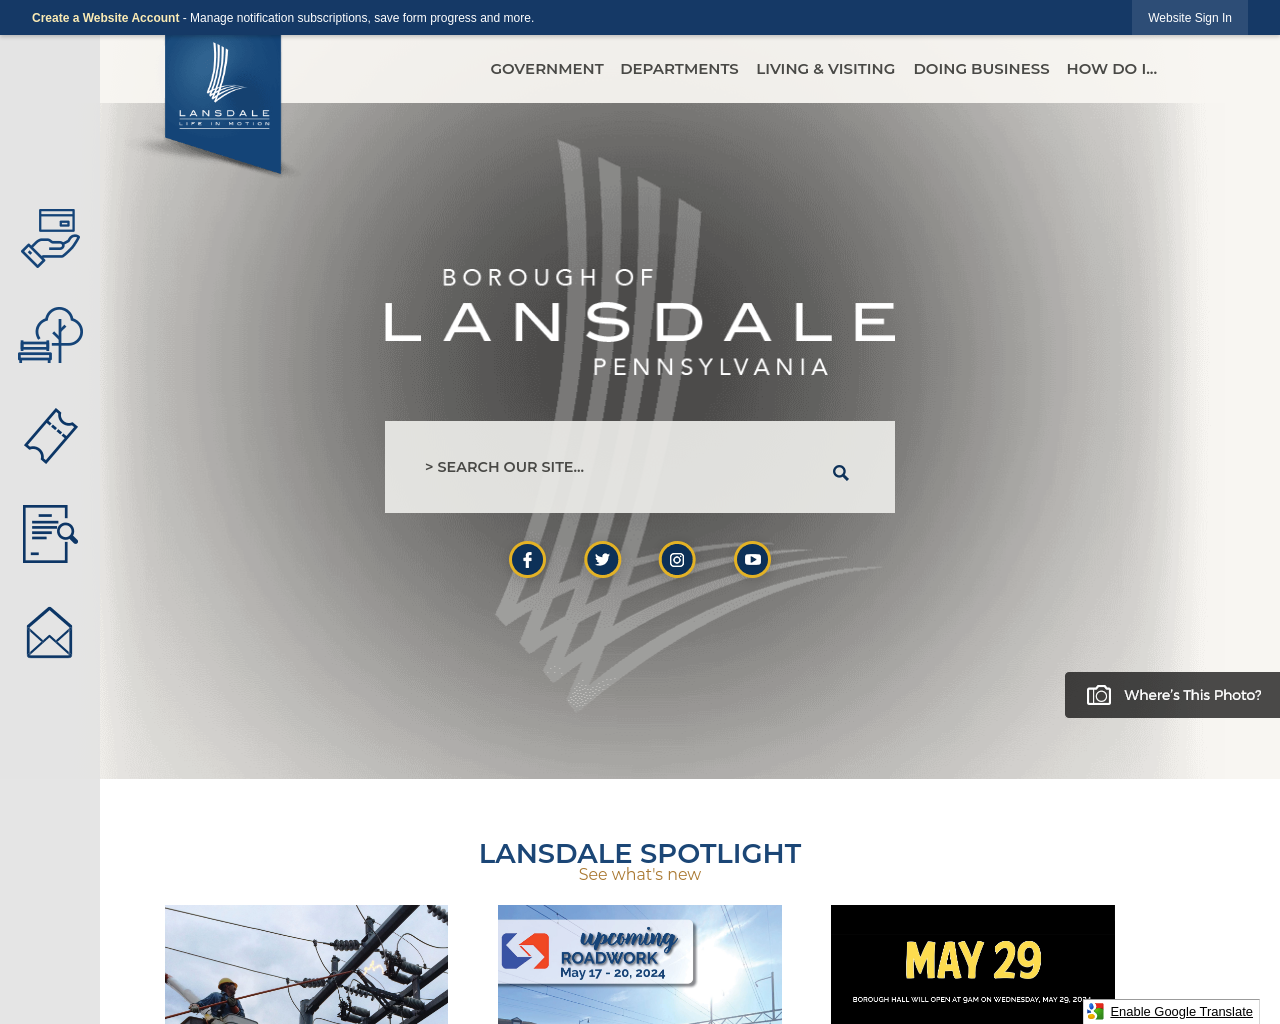 lansdale.org